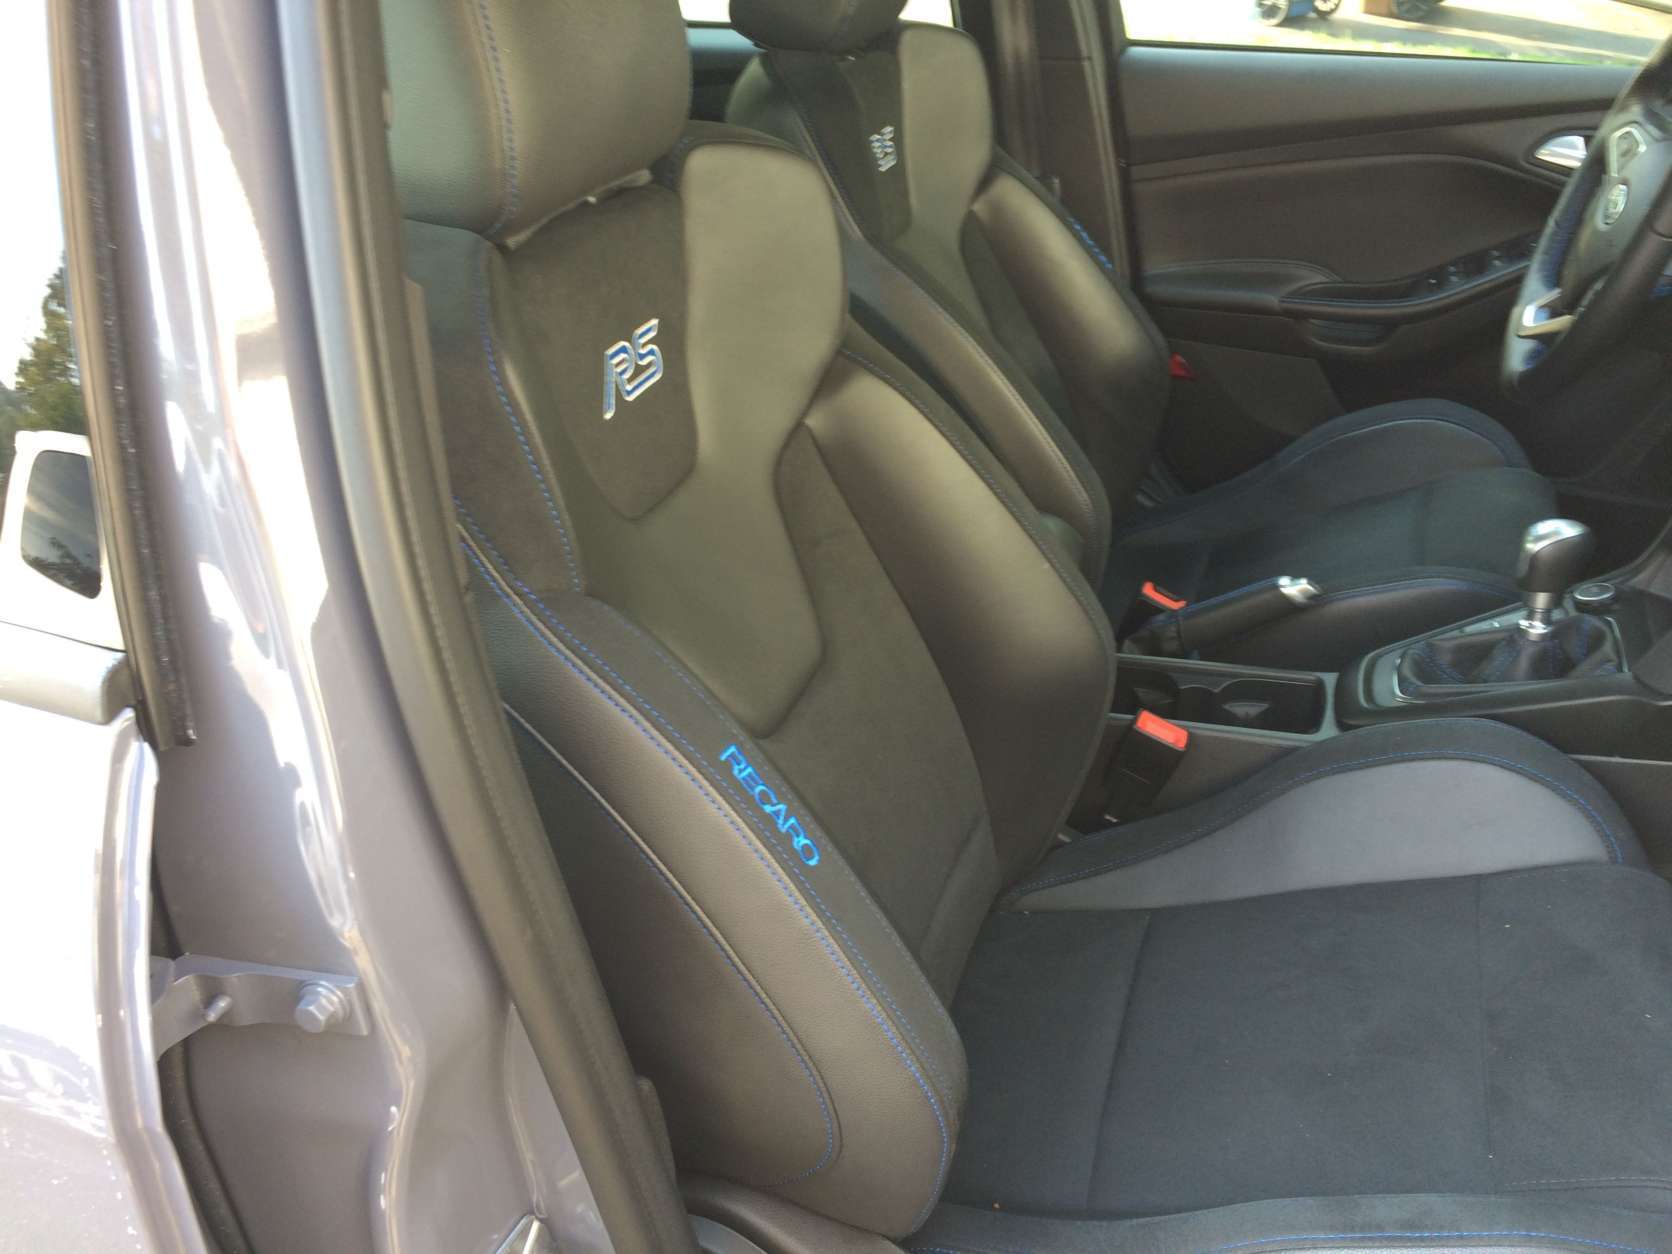 Up front, there are Recaro bucket seats that hug and keep you in place, although it might not be comfortable for all body types and sizes. (WTOP/Mike Parris) 